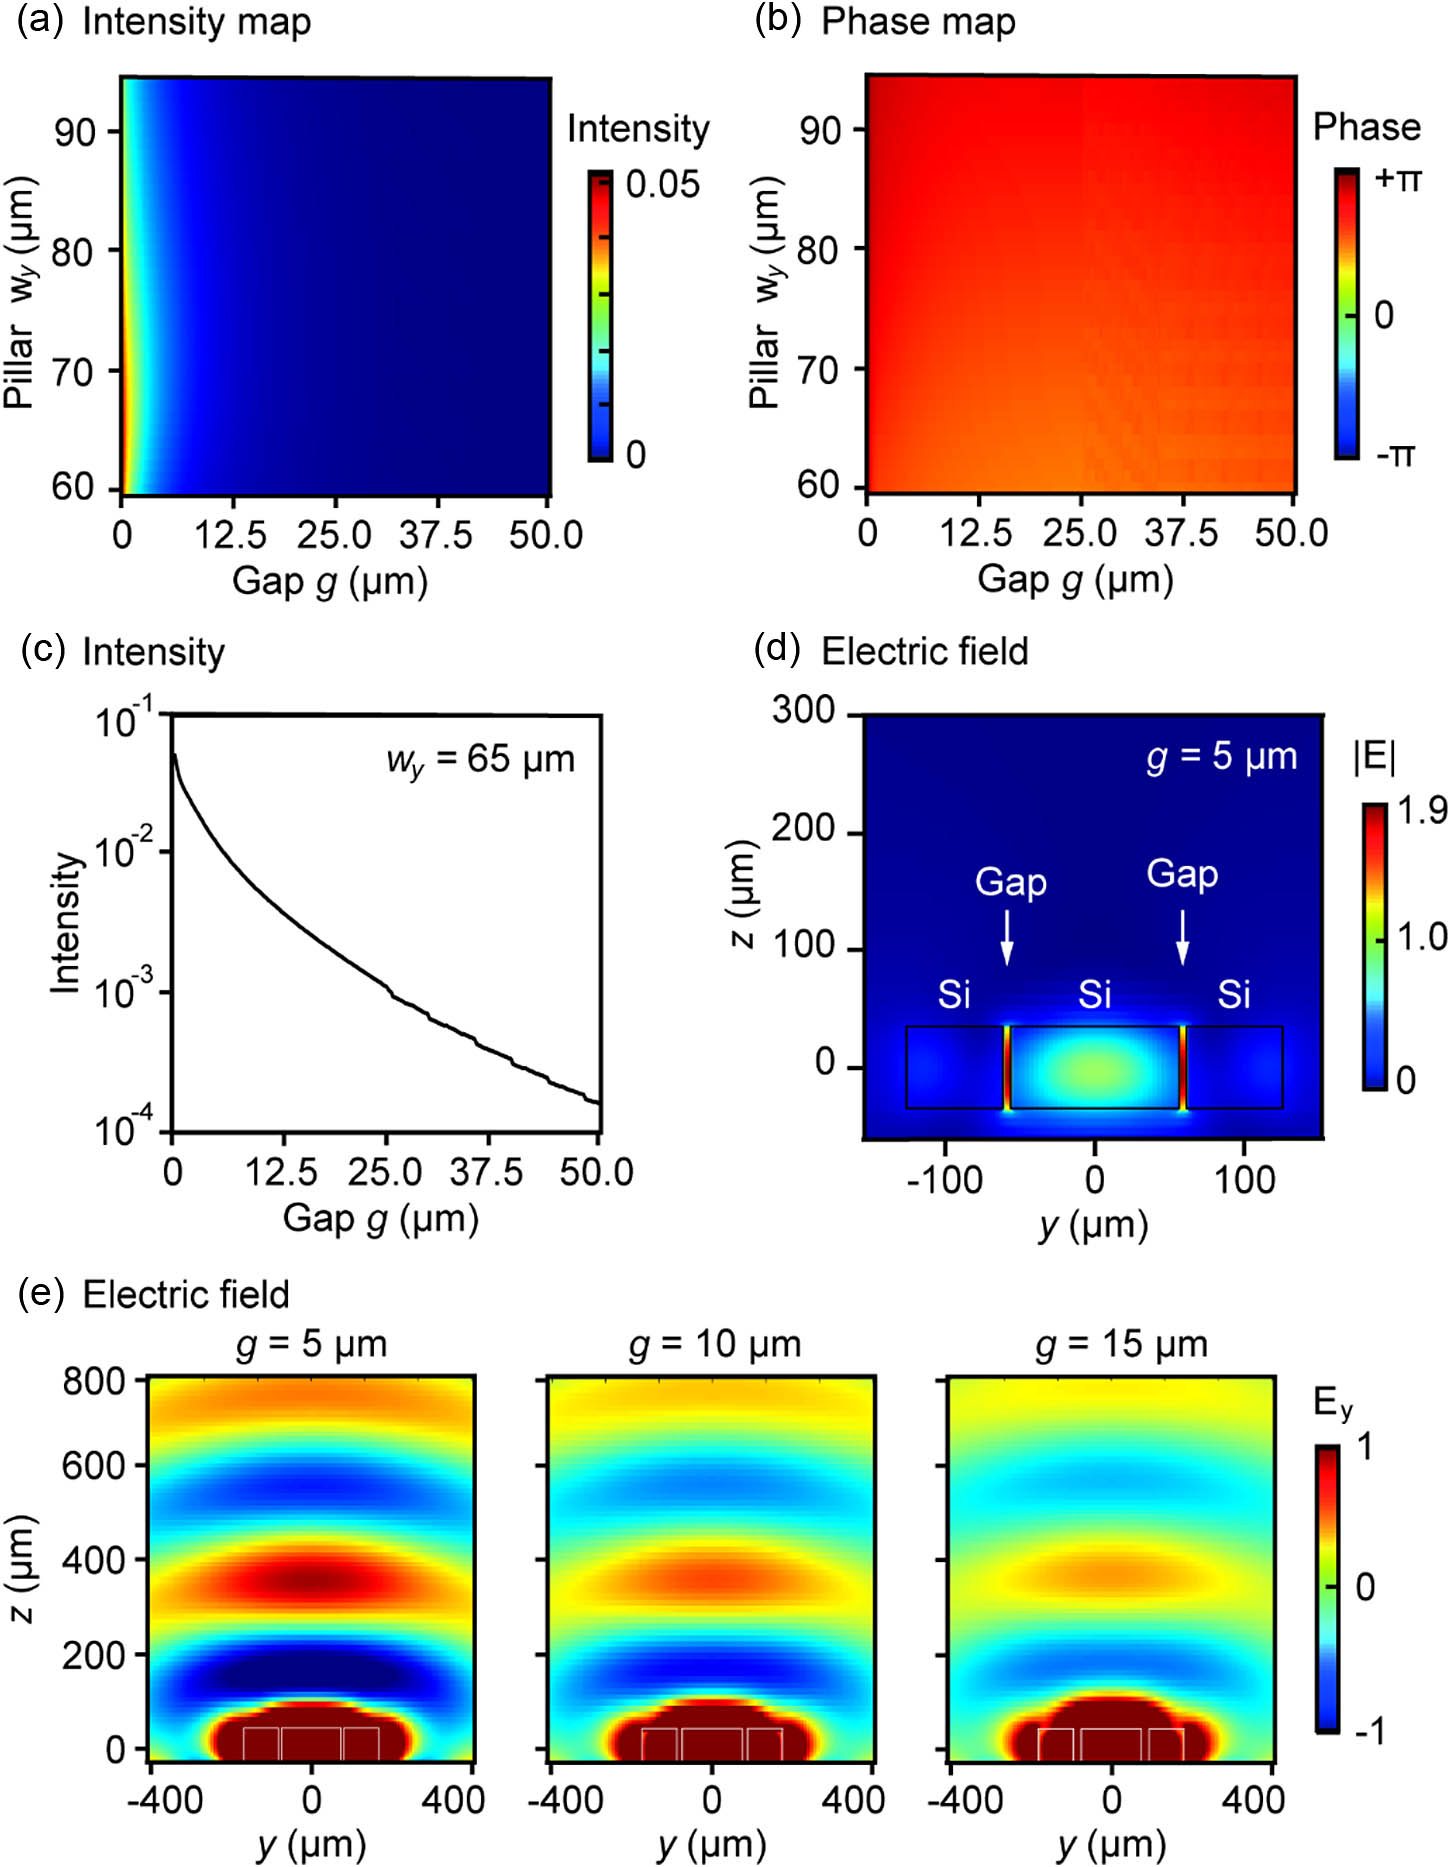 Light scattering of individual meta-atoms. The value of wx is fixed at 100 μm. (a) Scattering intensity after normalization against the input guided mode, with wy scanned from 60 to 94 μm and g from 0.25 to 50 μm. (b) Scattering phase in the same parameter ranges. (c) Dependence of the output intensity on g with wy fixed at 65 μm. The data are taken from the horizontal line of wy=65 μm in panel (a). (d) Electric field distribution at the yz middle plane of a representative meta-atom, which has wy=65 μm and g=5 μm. The field is normalized against that at the center of the waveguide. (e) The same meta-atom is plotted again at a different scale, and compared against two other meta-atoms. The only geometric difference of these meta-atoms is the value g, which takes three representative values of 5, 10, and 15 μm. All three panels are plotted at the same scale to best visualize the free-space light. As this scale, features of the near field confined to the surface of the meta-atoms are not clearly resolved.